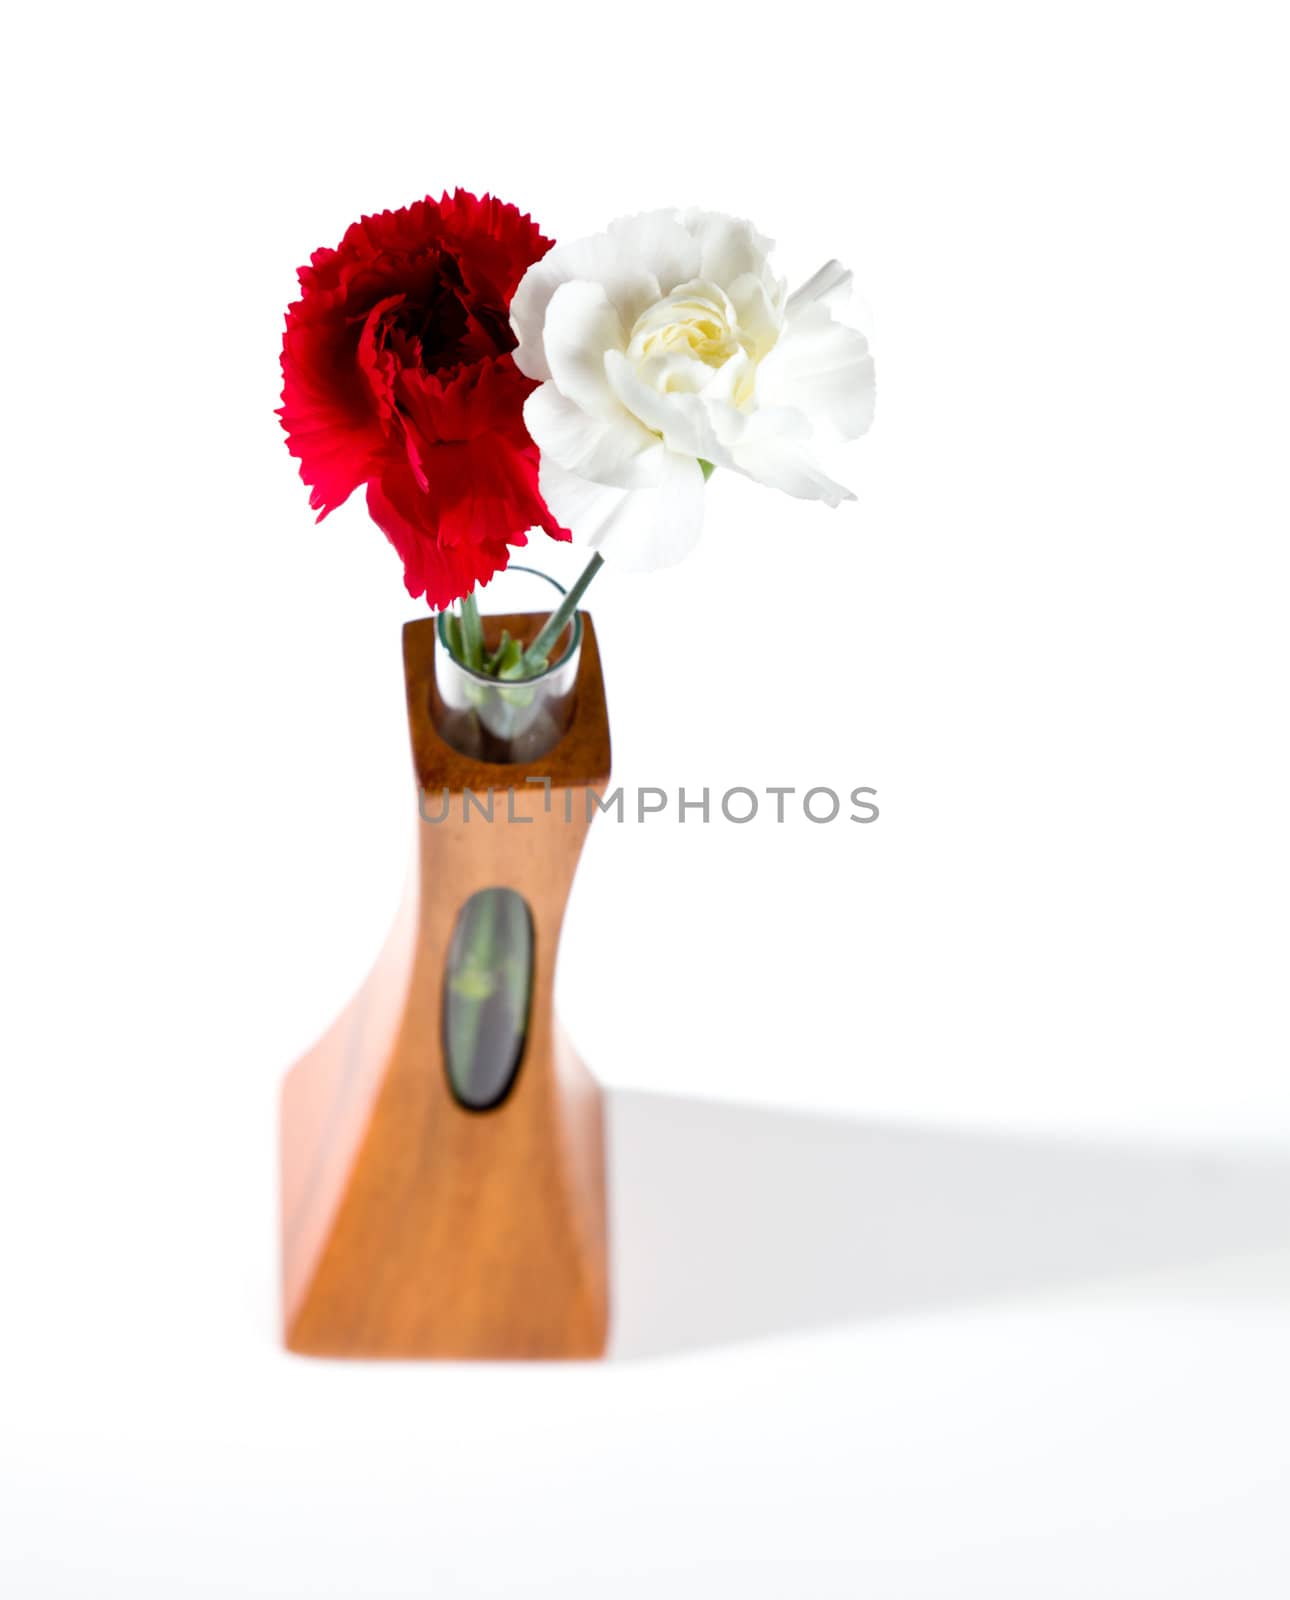 Red and white spray carnations in teak vase by steheap